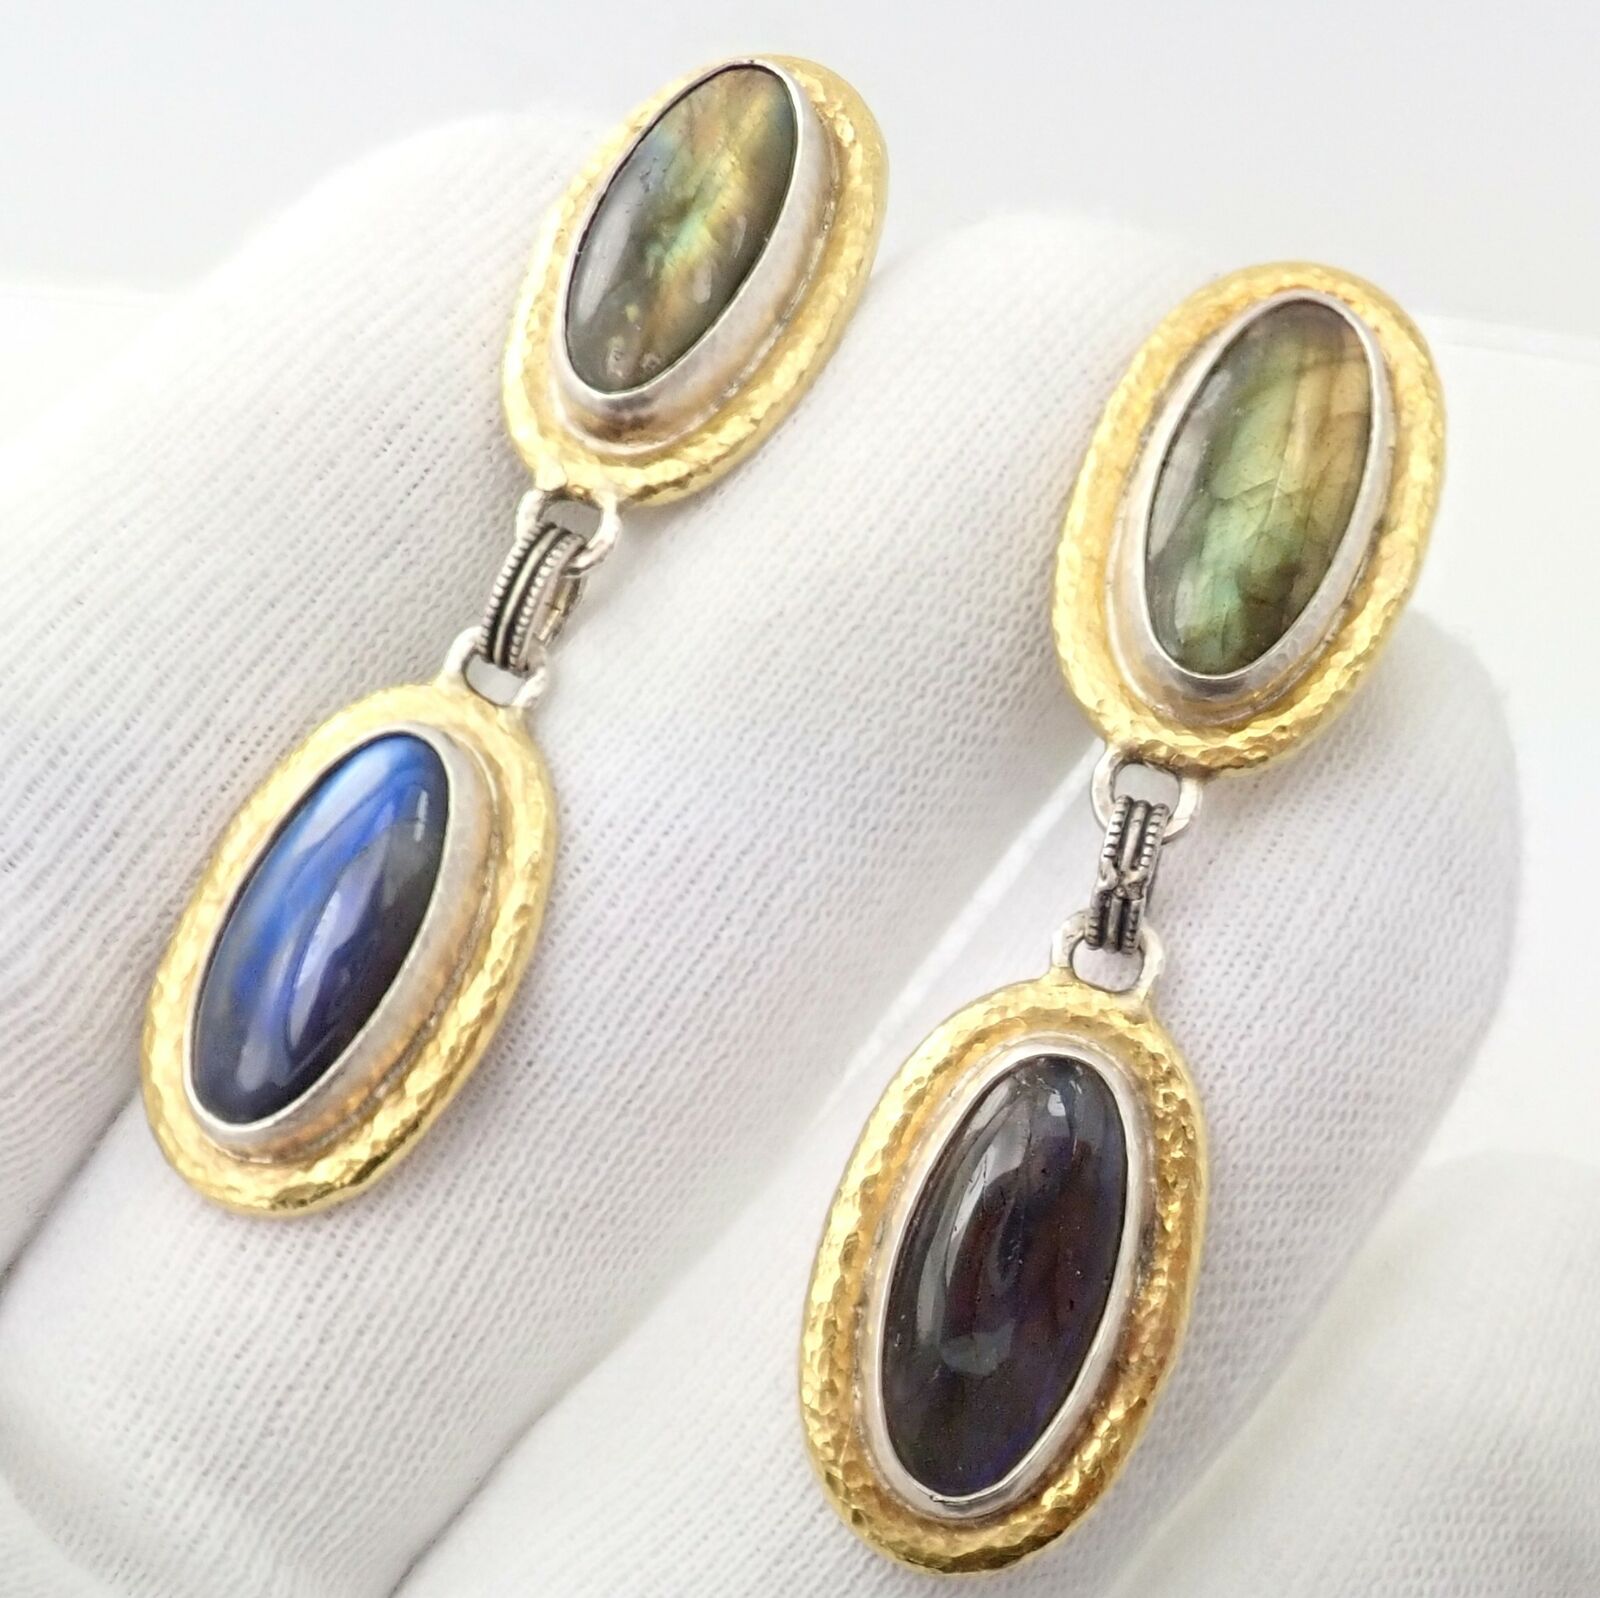 Gurhan Jewelry & Watches:Vintage & Antique Jewelry:Earrings Authentic! Gurhan Hammered Sterling Silver 24k Gold Black Opal Earrings